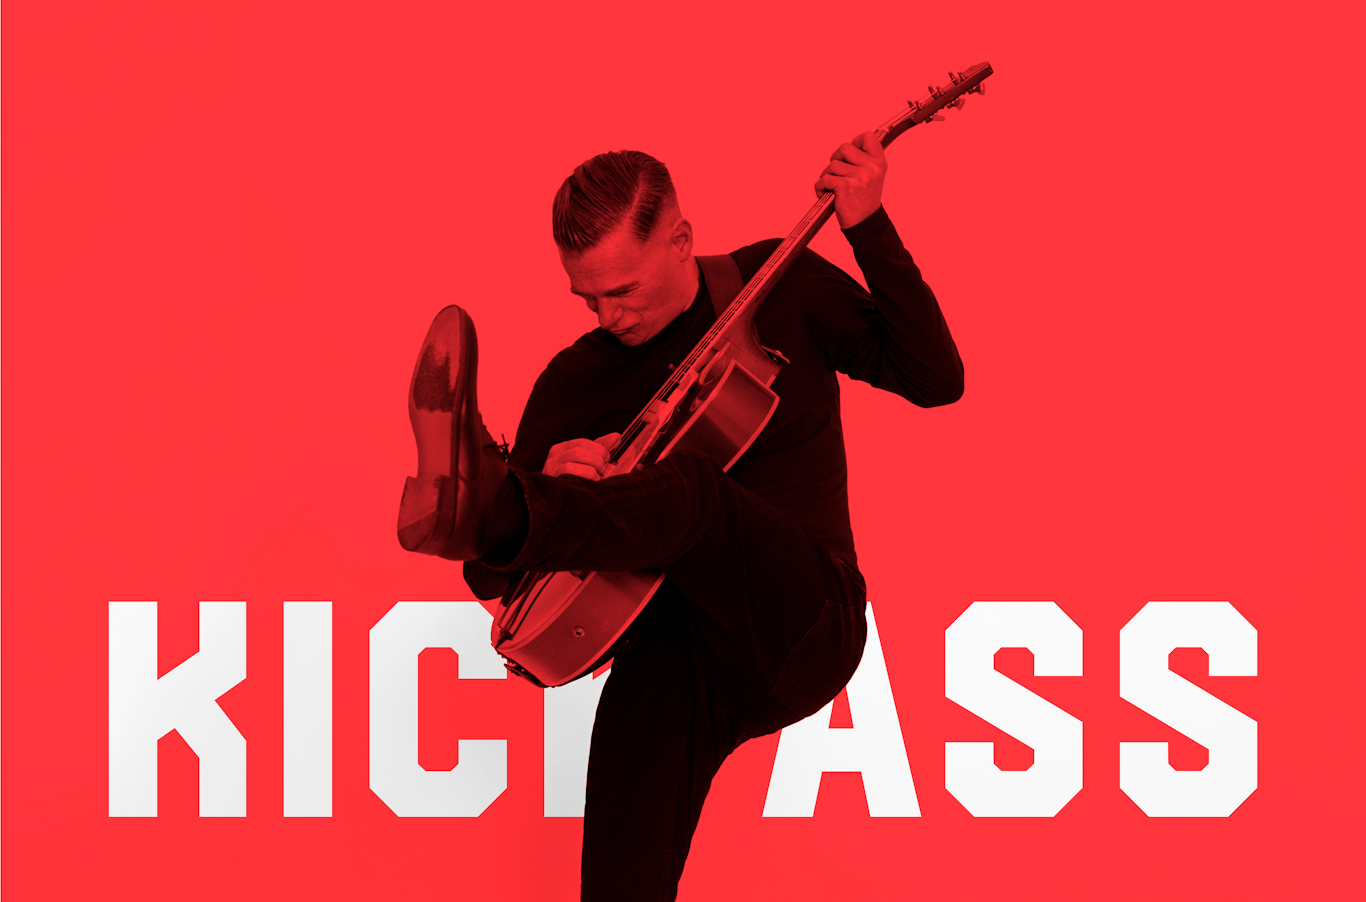 BRYAN ADAMS releases new song 'Kick Ass' - the latest song from his forthcoming studio album So Happy It Hurts 